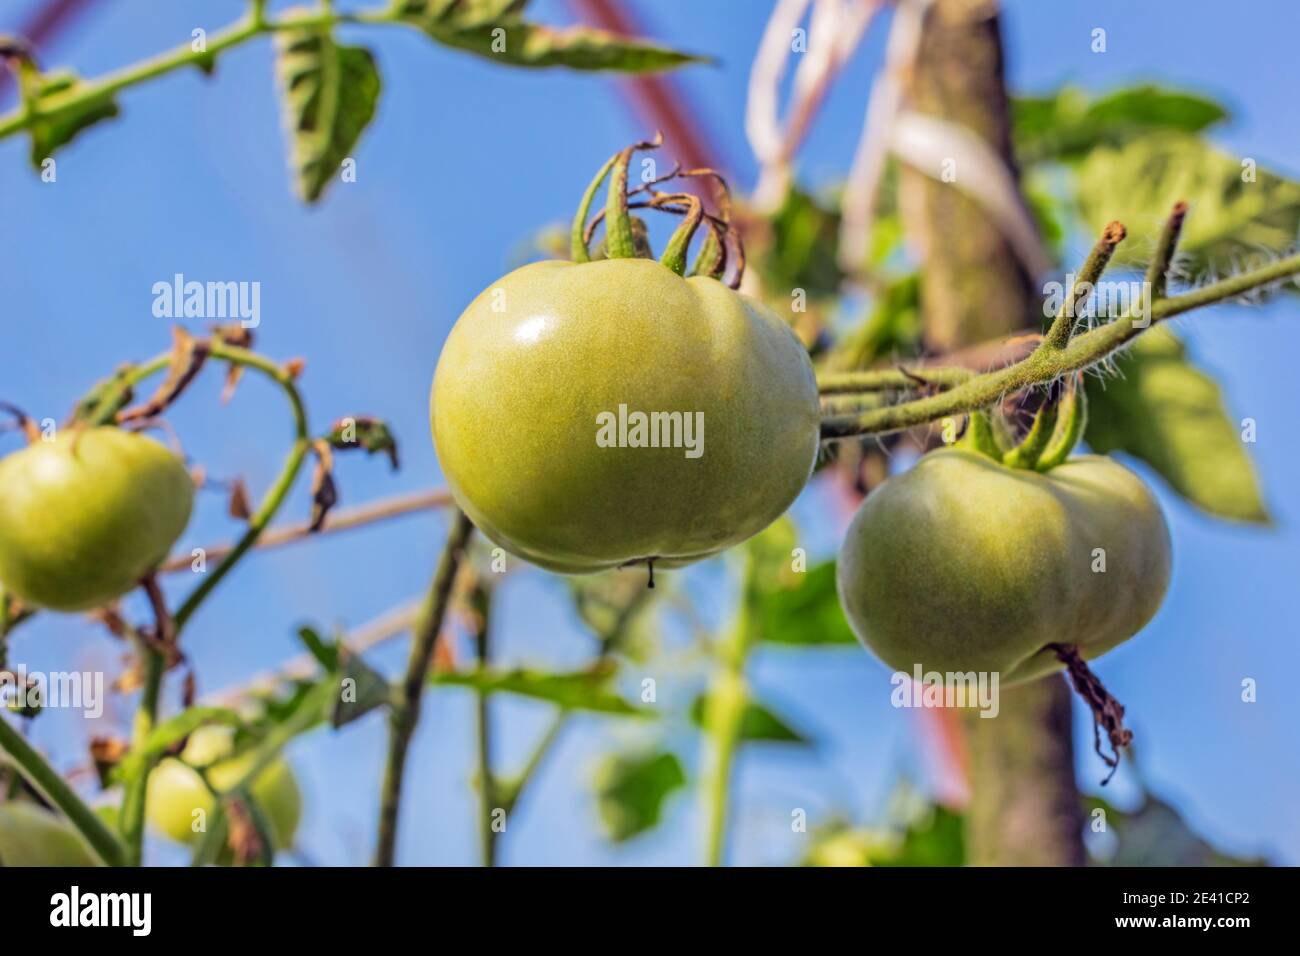 Pretty green tomatoes on branch in garden at sunny summer day Stock Photo